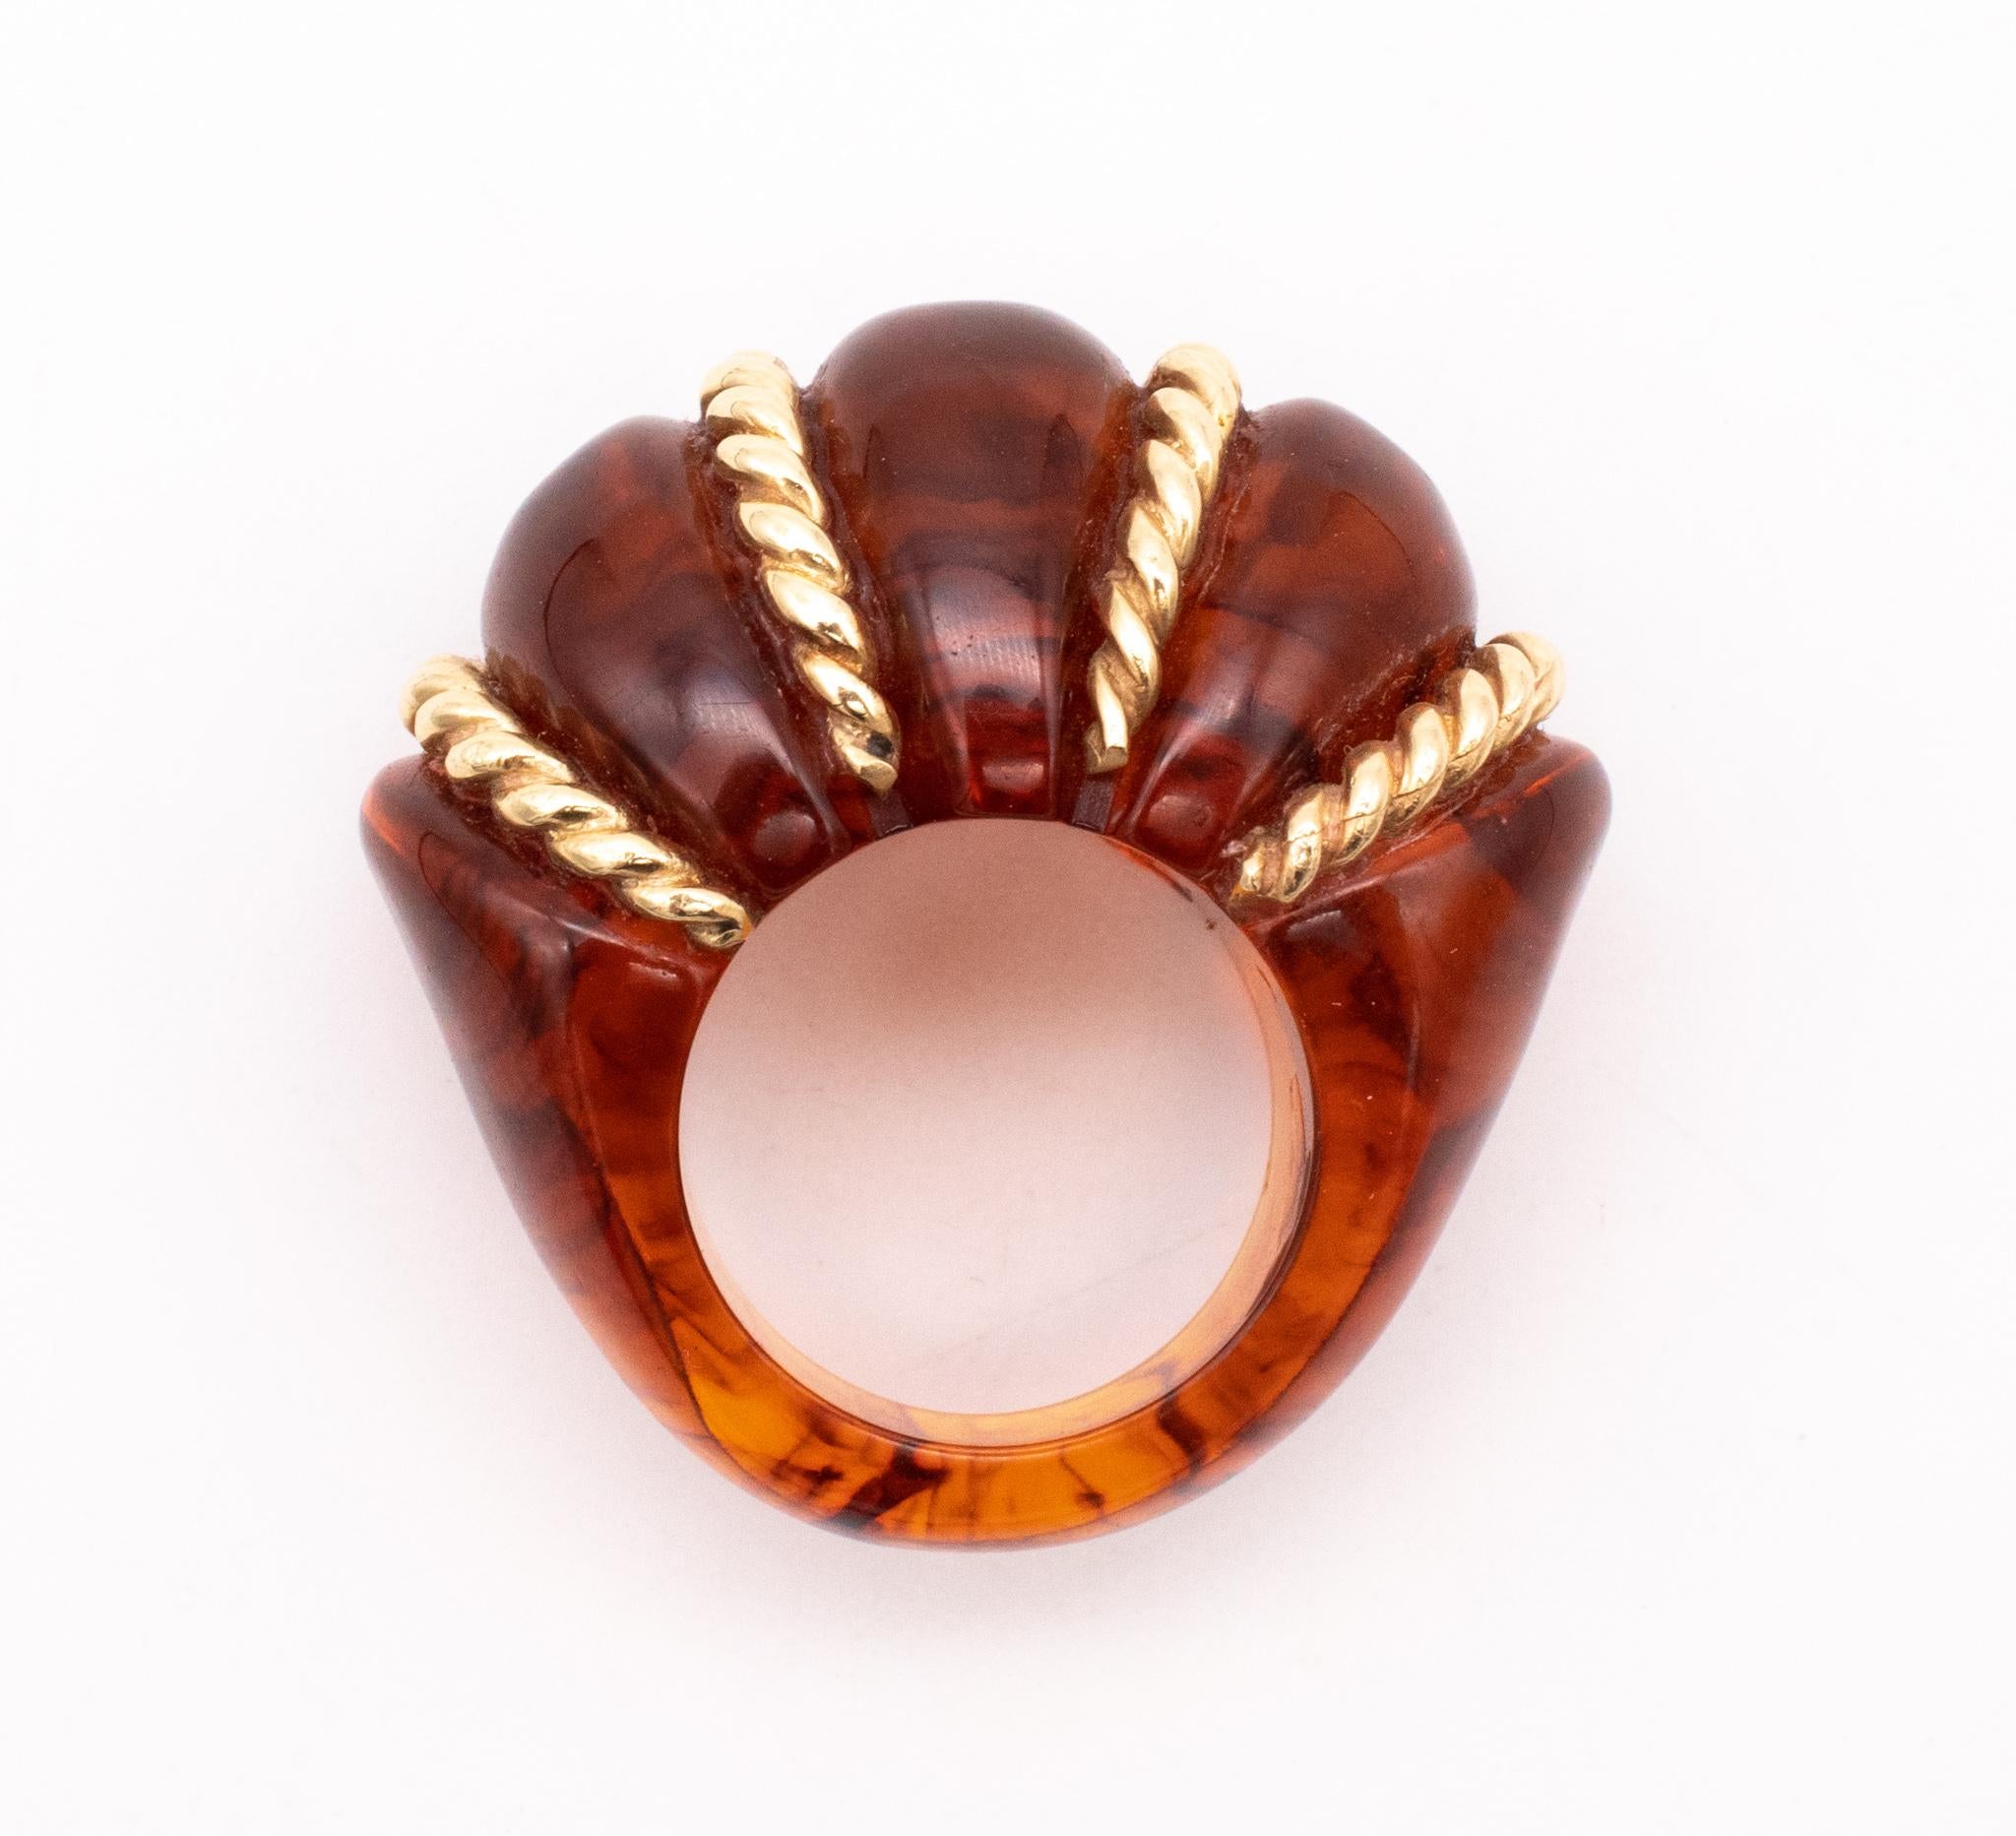 Modernist Seaman Schepps 1950 New York Very Rare 18Kt Gold Wired Ring Carved in Amber For Sale